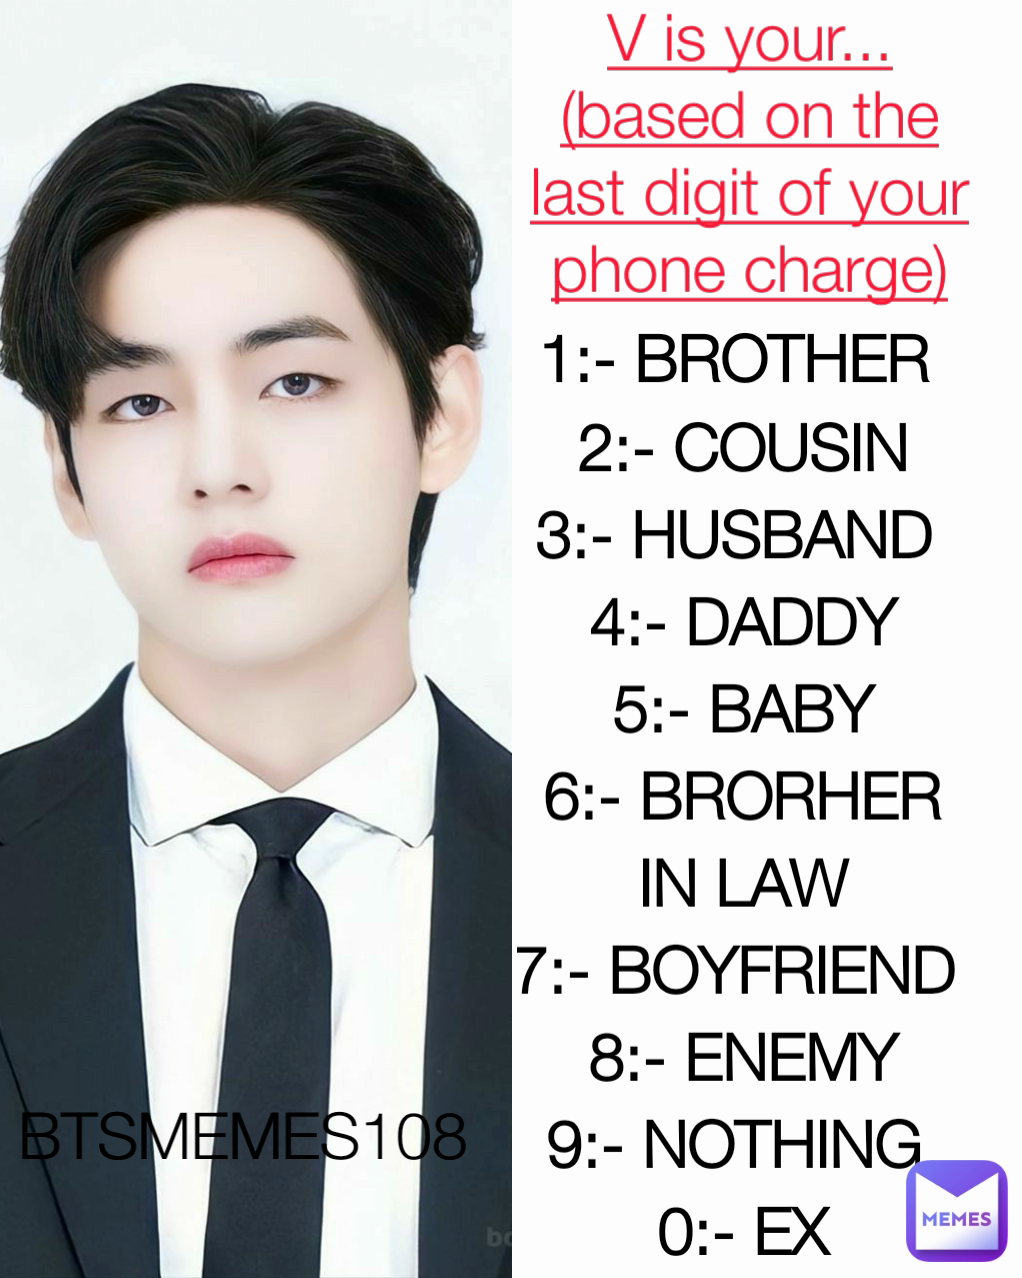 BTSMEMES108  V is your...
(based on the last digit of your phone charge) 1:- BROTHER 
2:- COUSIN
3:- HUSBAND 
4:- DADDY
5:- BABY
6:- BRORHER IN LAW
7:- BOYFRIEND 
8:- ENEMY
9:- NOTHING 
0:- EX